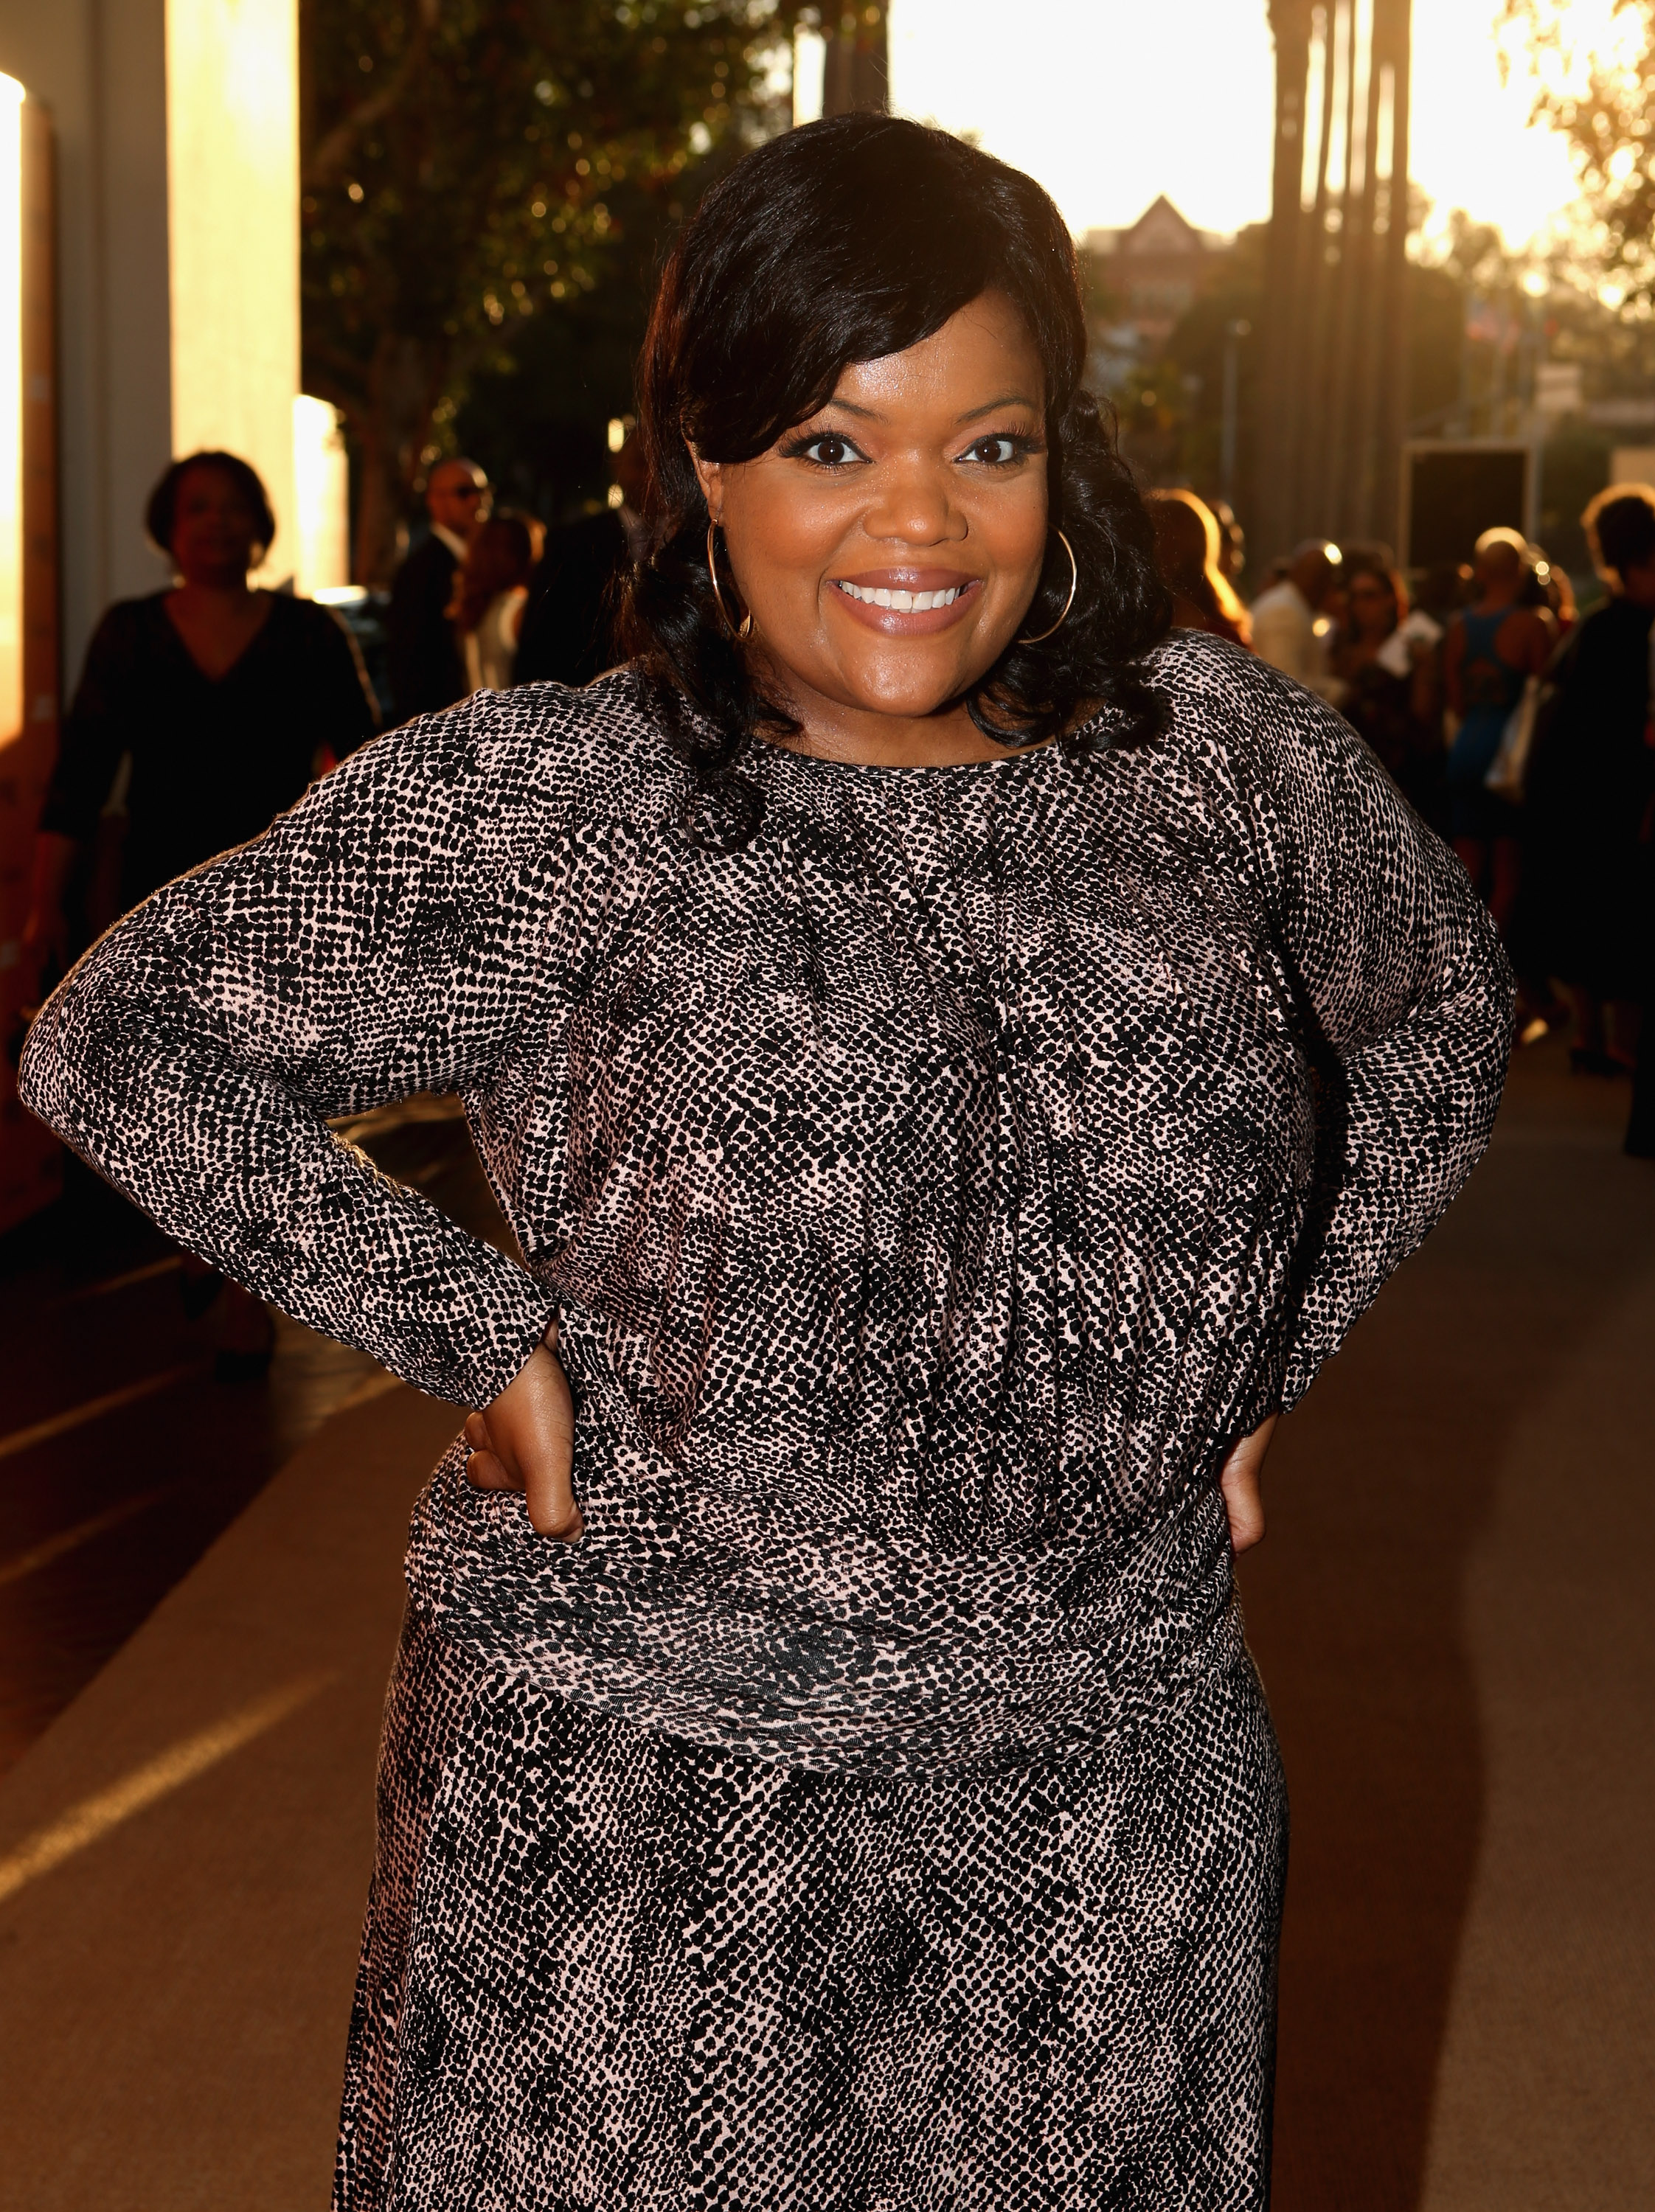 Yvette Nicole Brown at Debra Lee's Pre-BET Awards Celebration during the BET Awards on June 30, 2012, in Los Angeles, California | Source: Getty Images